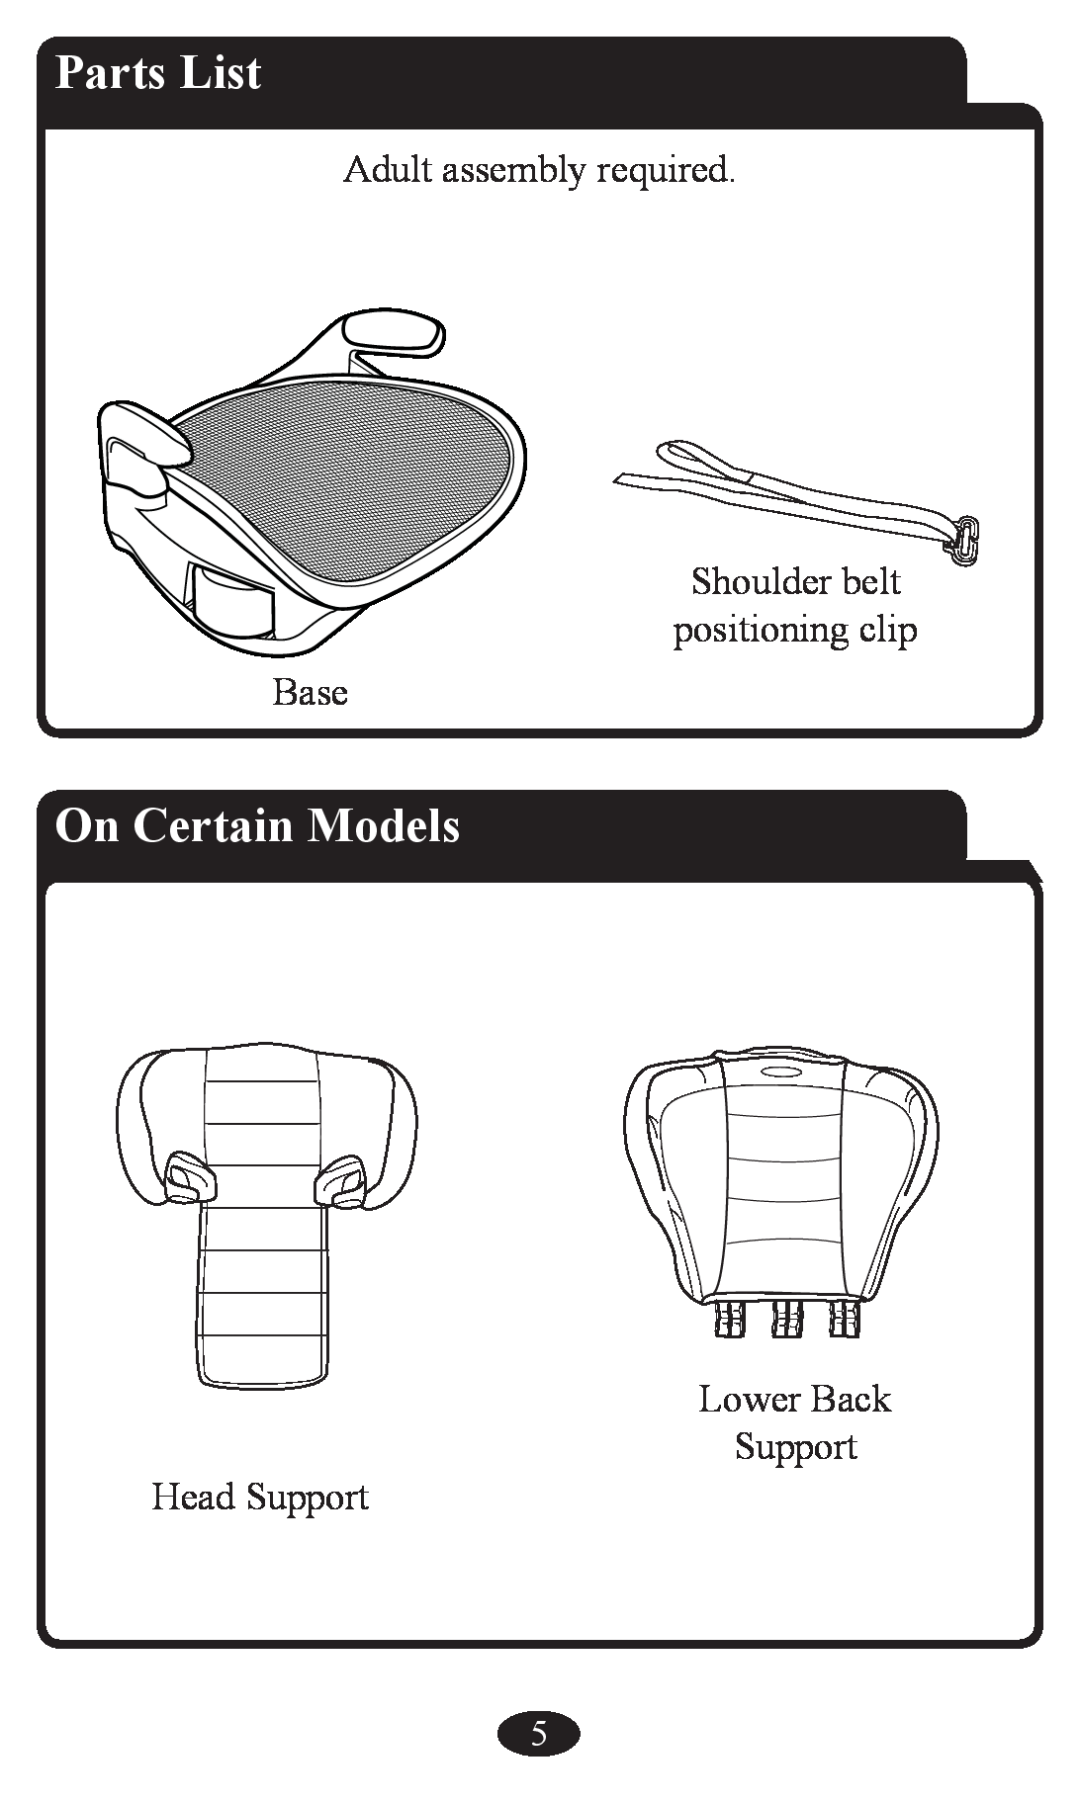 Graco Booster Seat owner manual Parts List, On Certain Models, Adult assembly required Shoulder belt positioning clip Base 